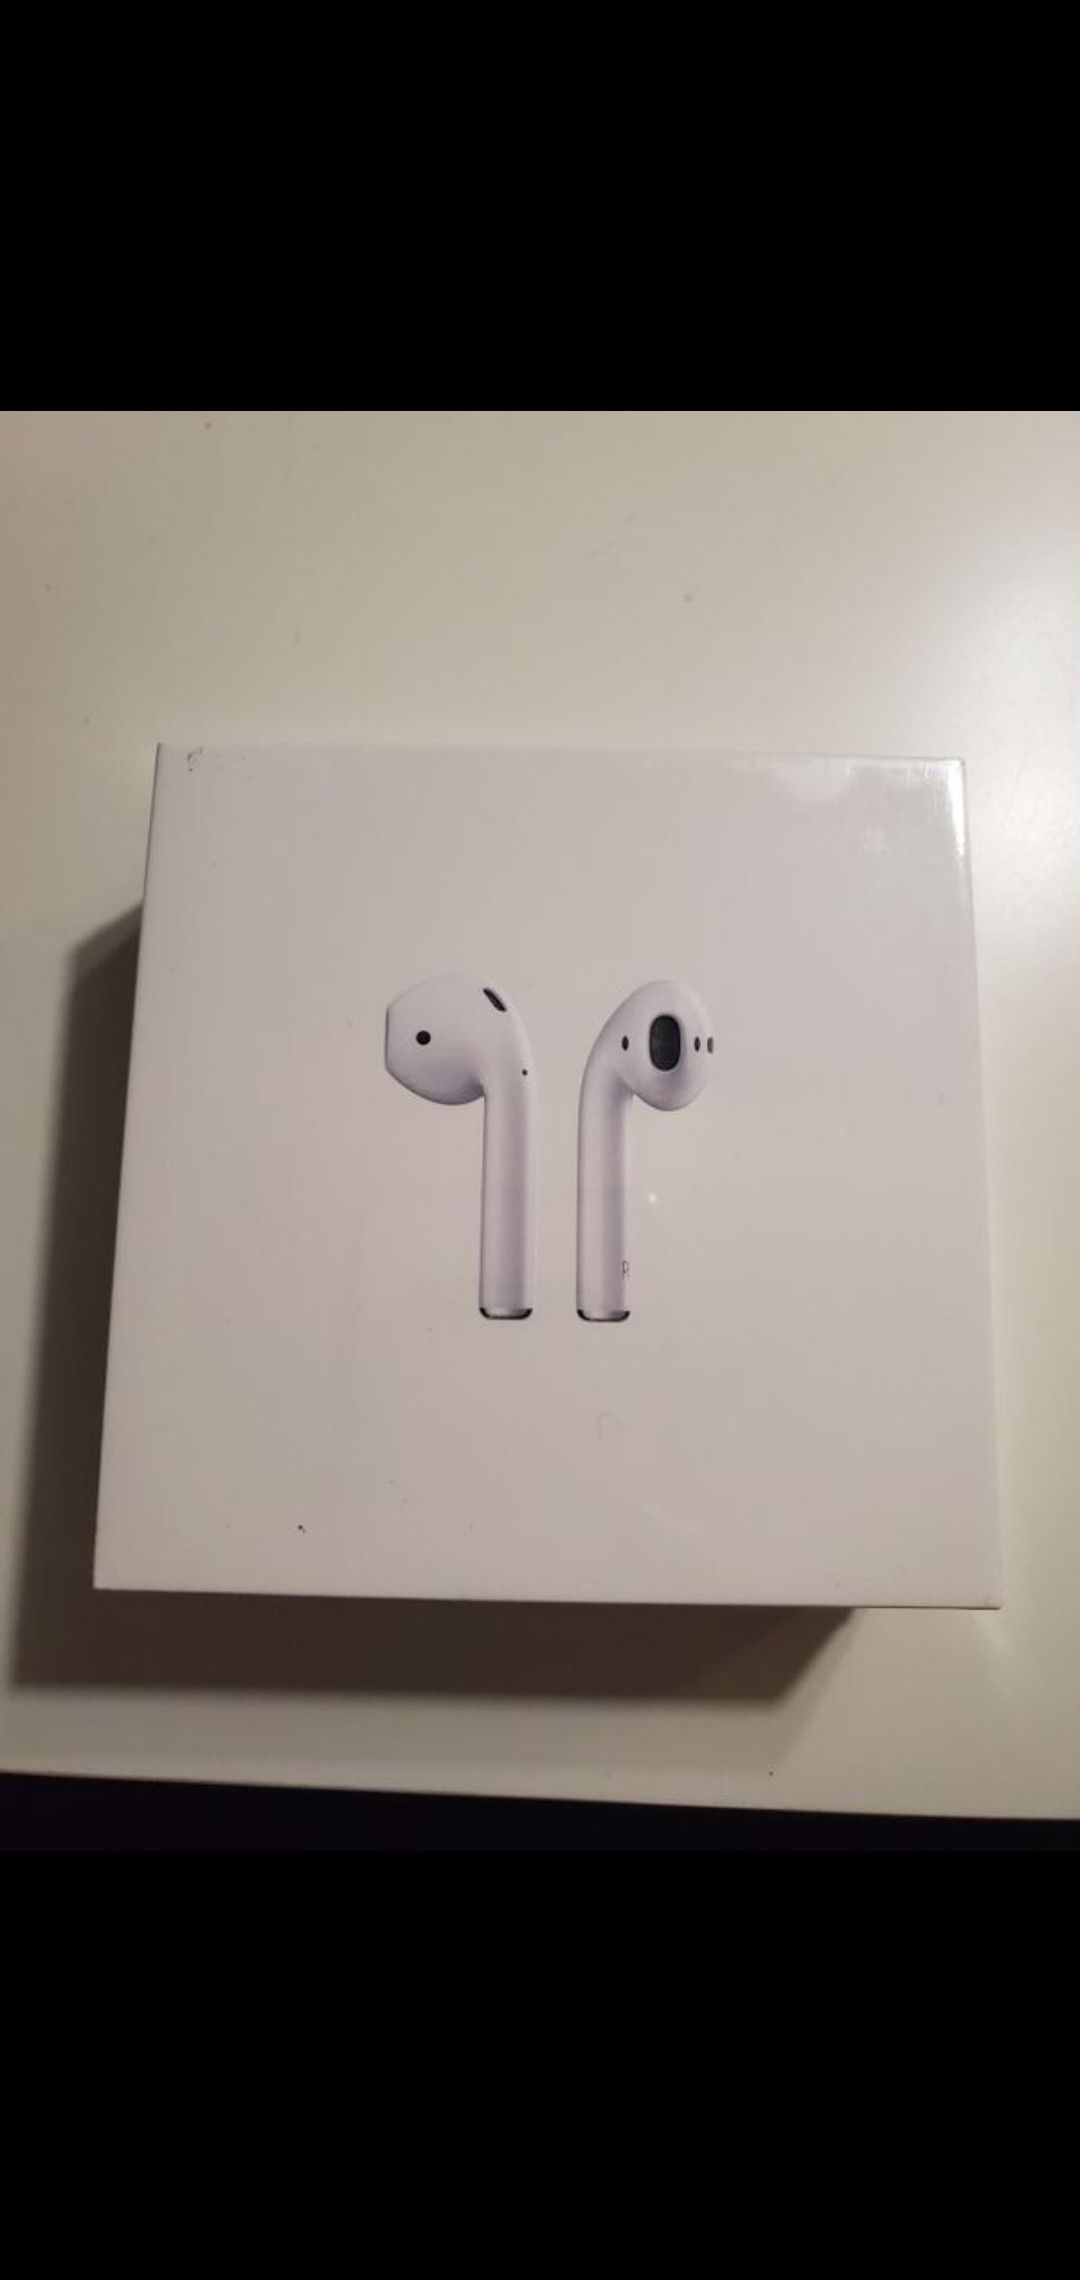 Apple Airpods (2nd Gen) CHARGING CASE